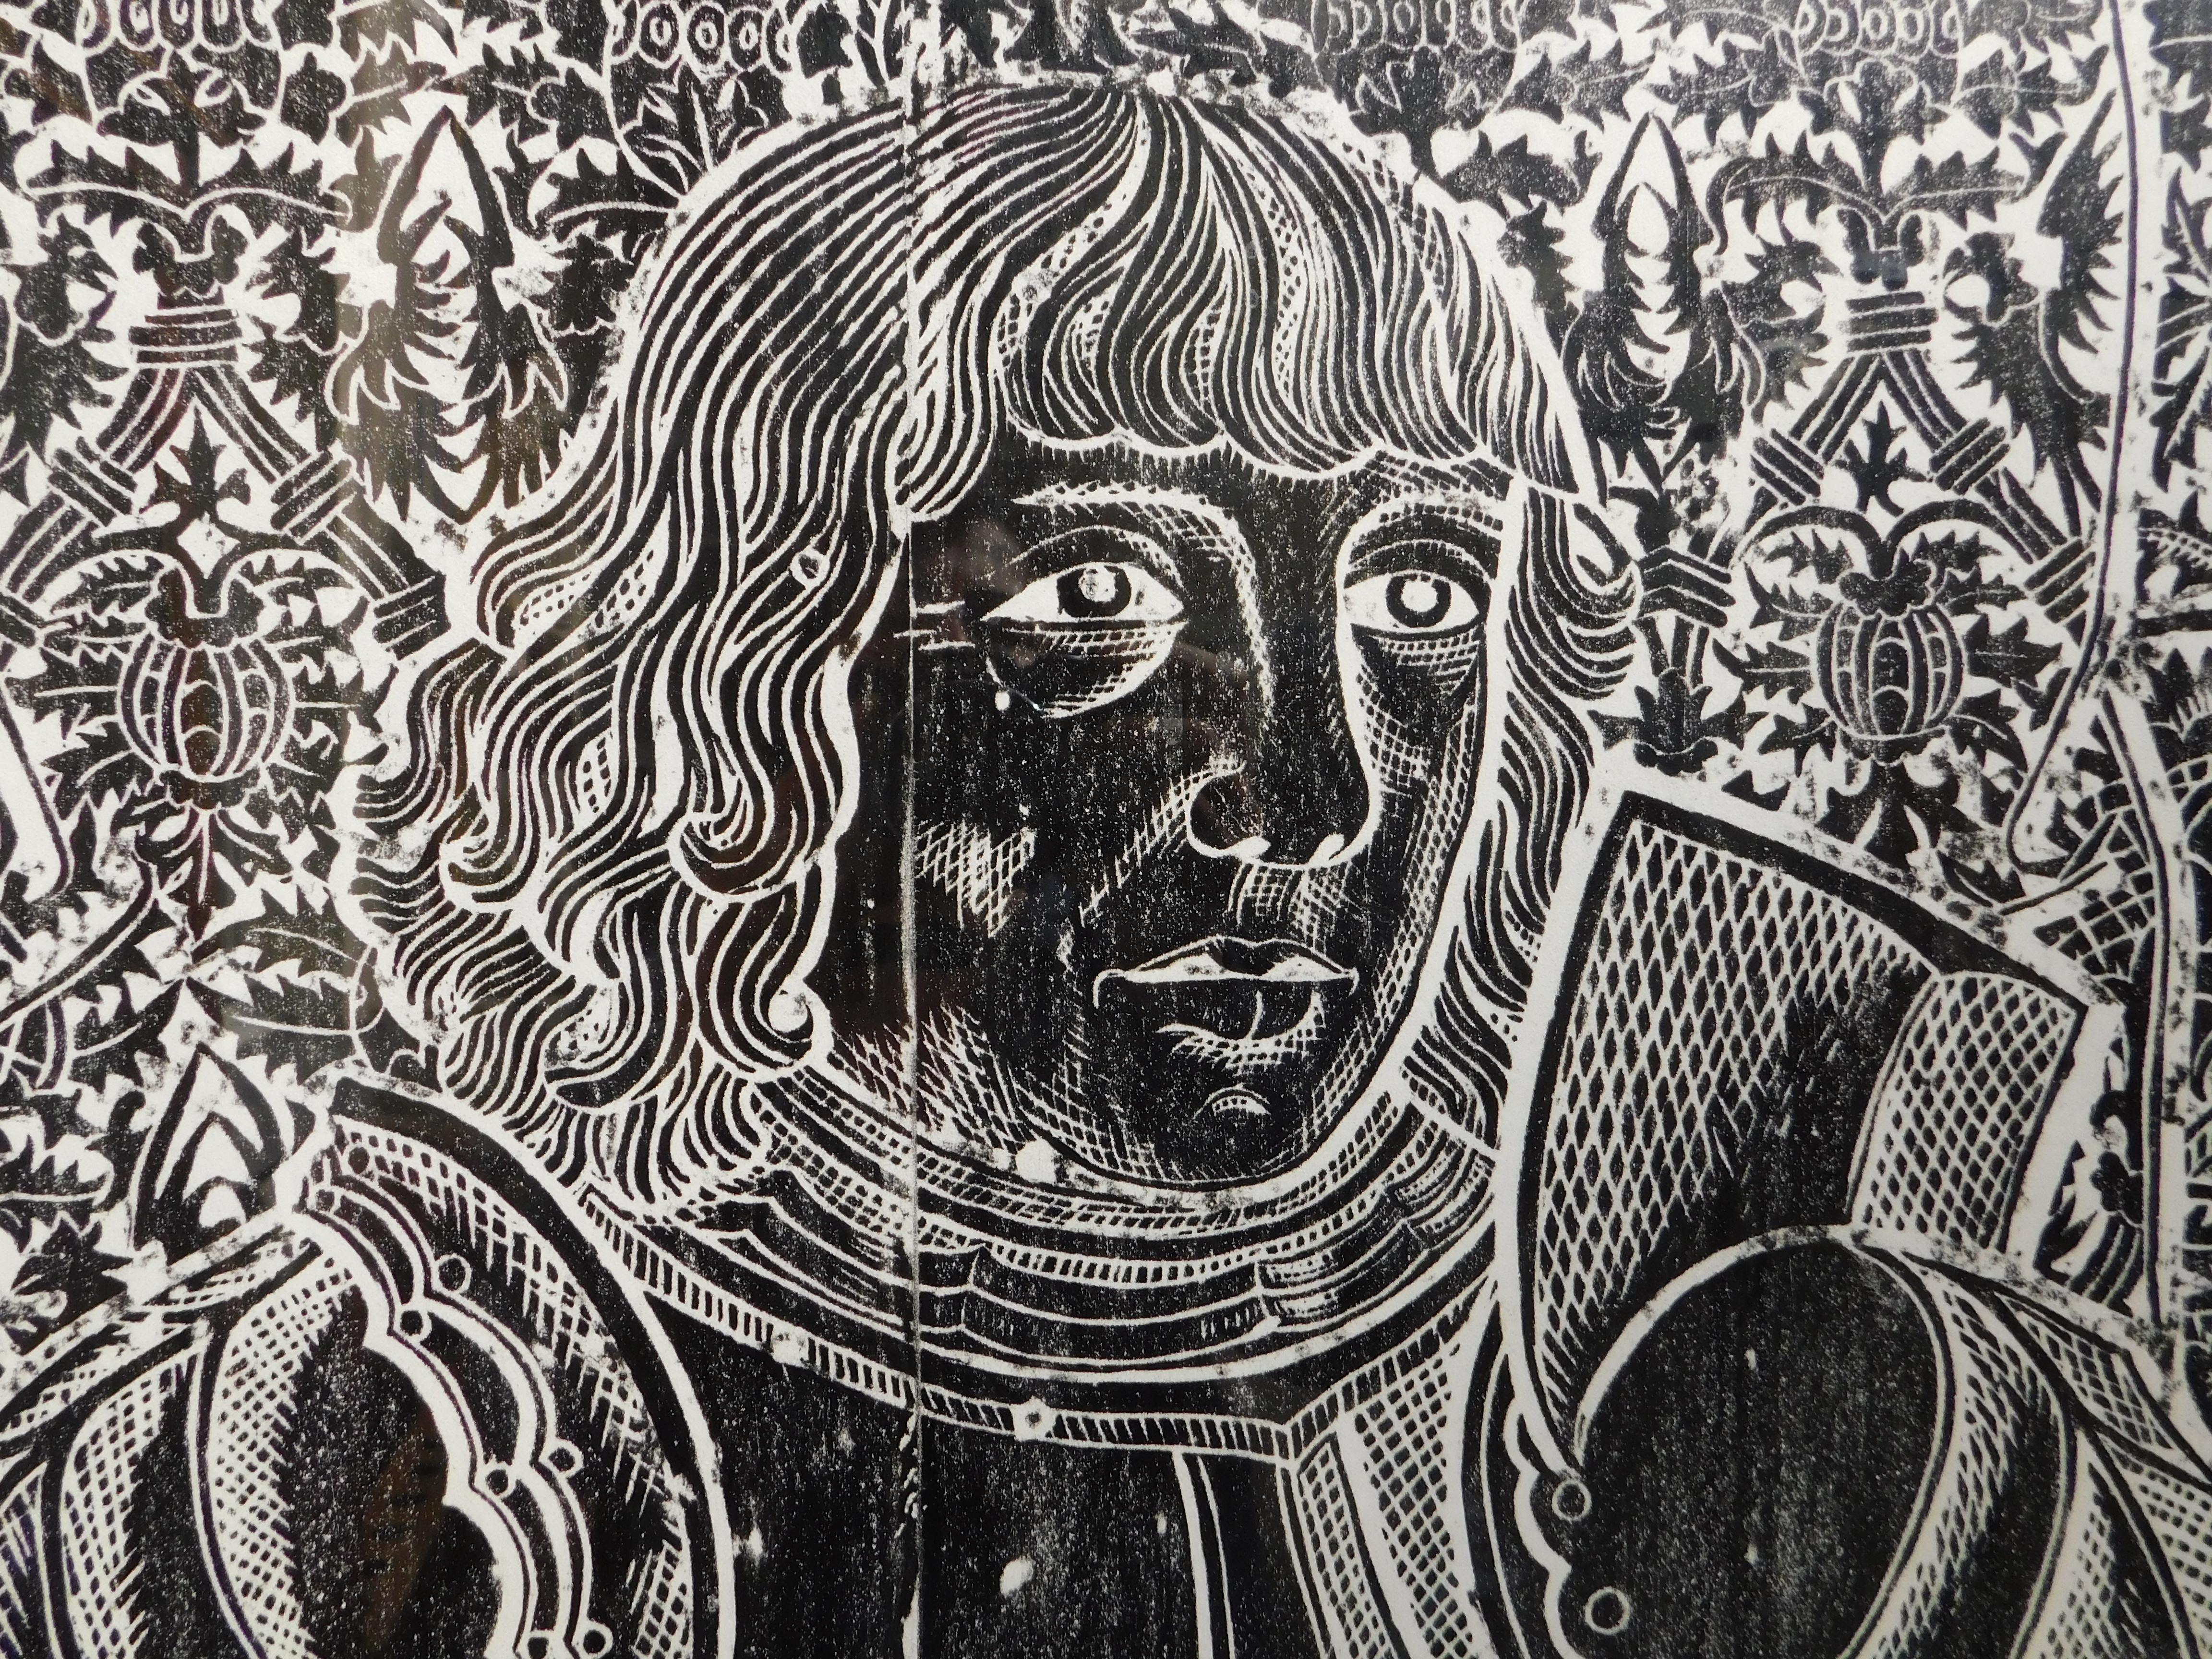 20th Century Vintage and Black Wax Rubbing on Paper of a 13th Century English Tomb Carving